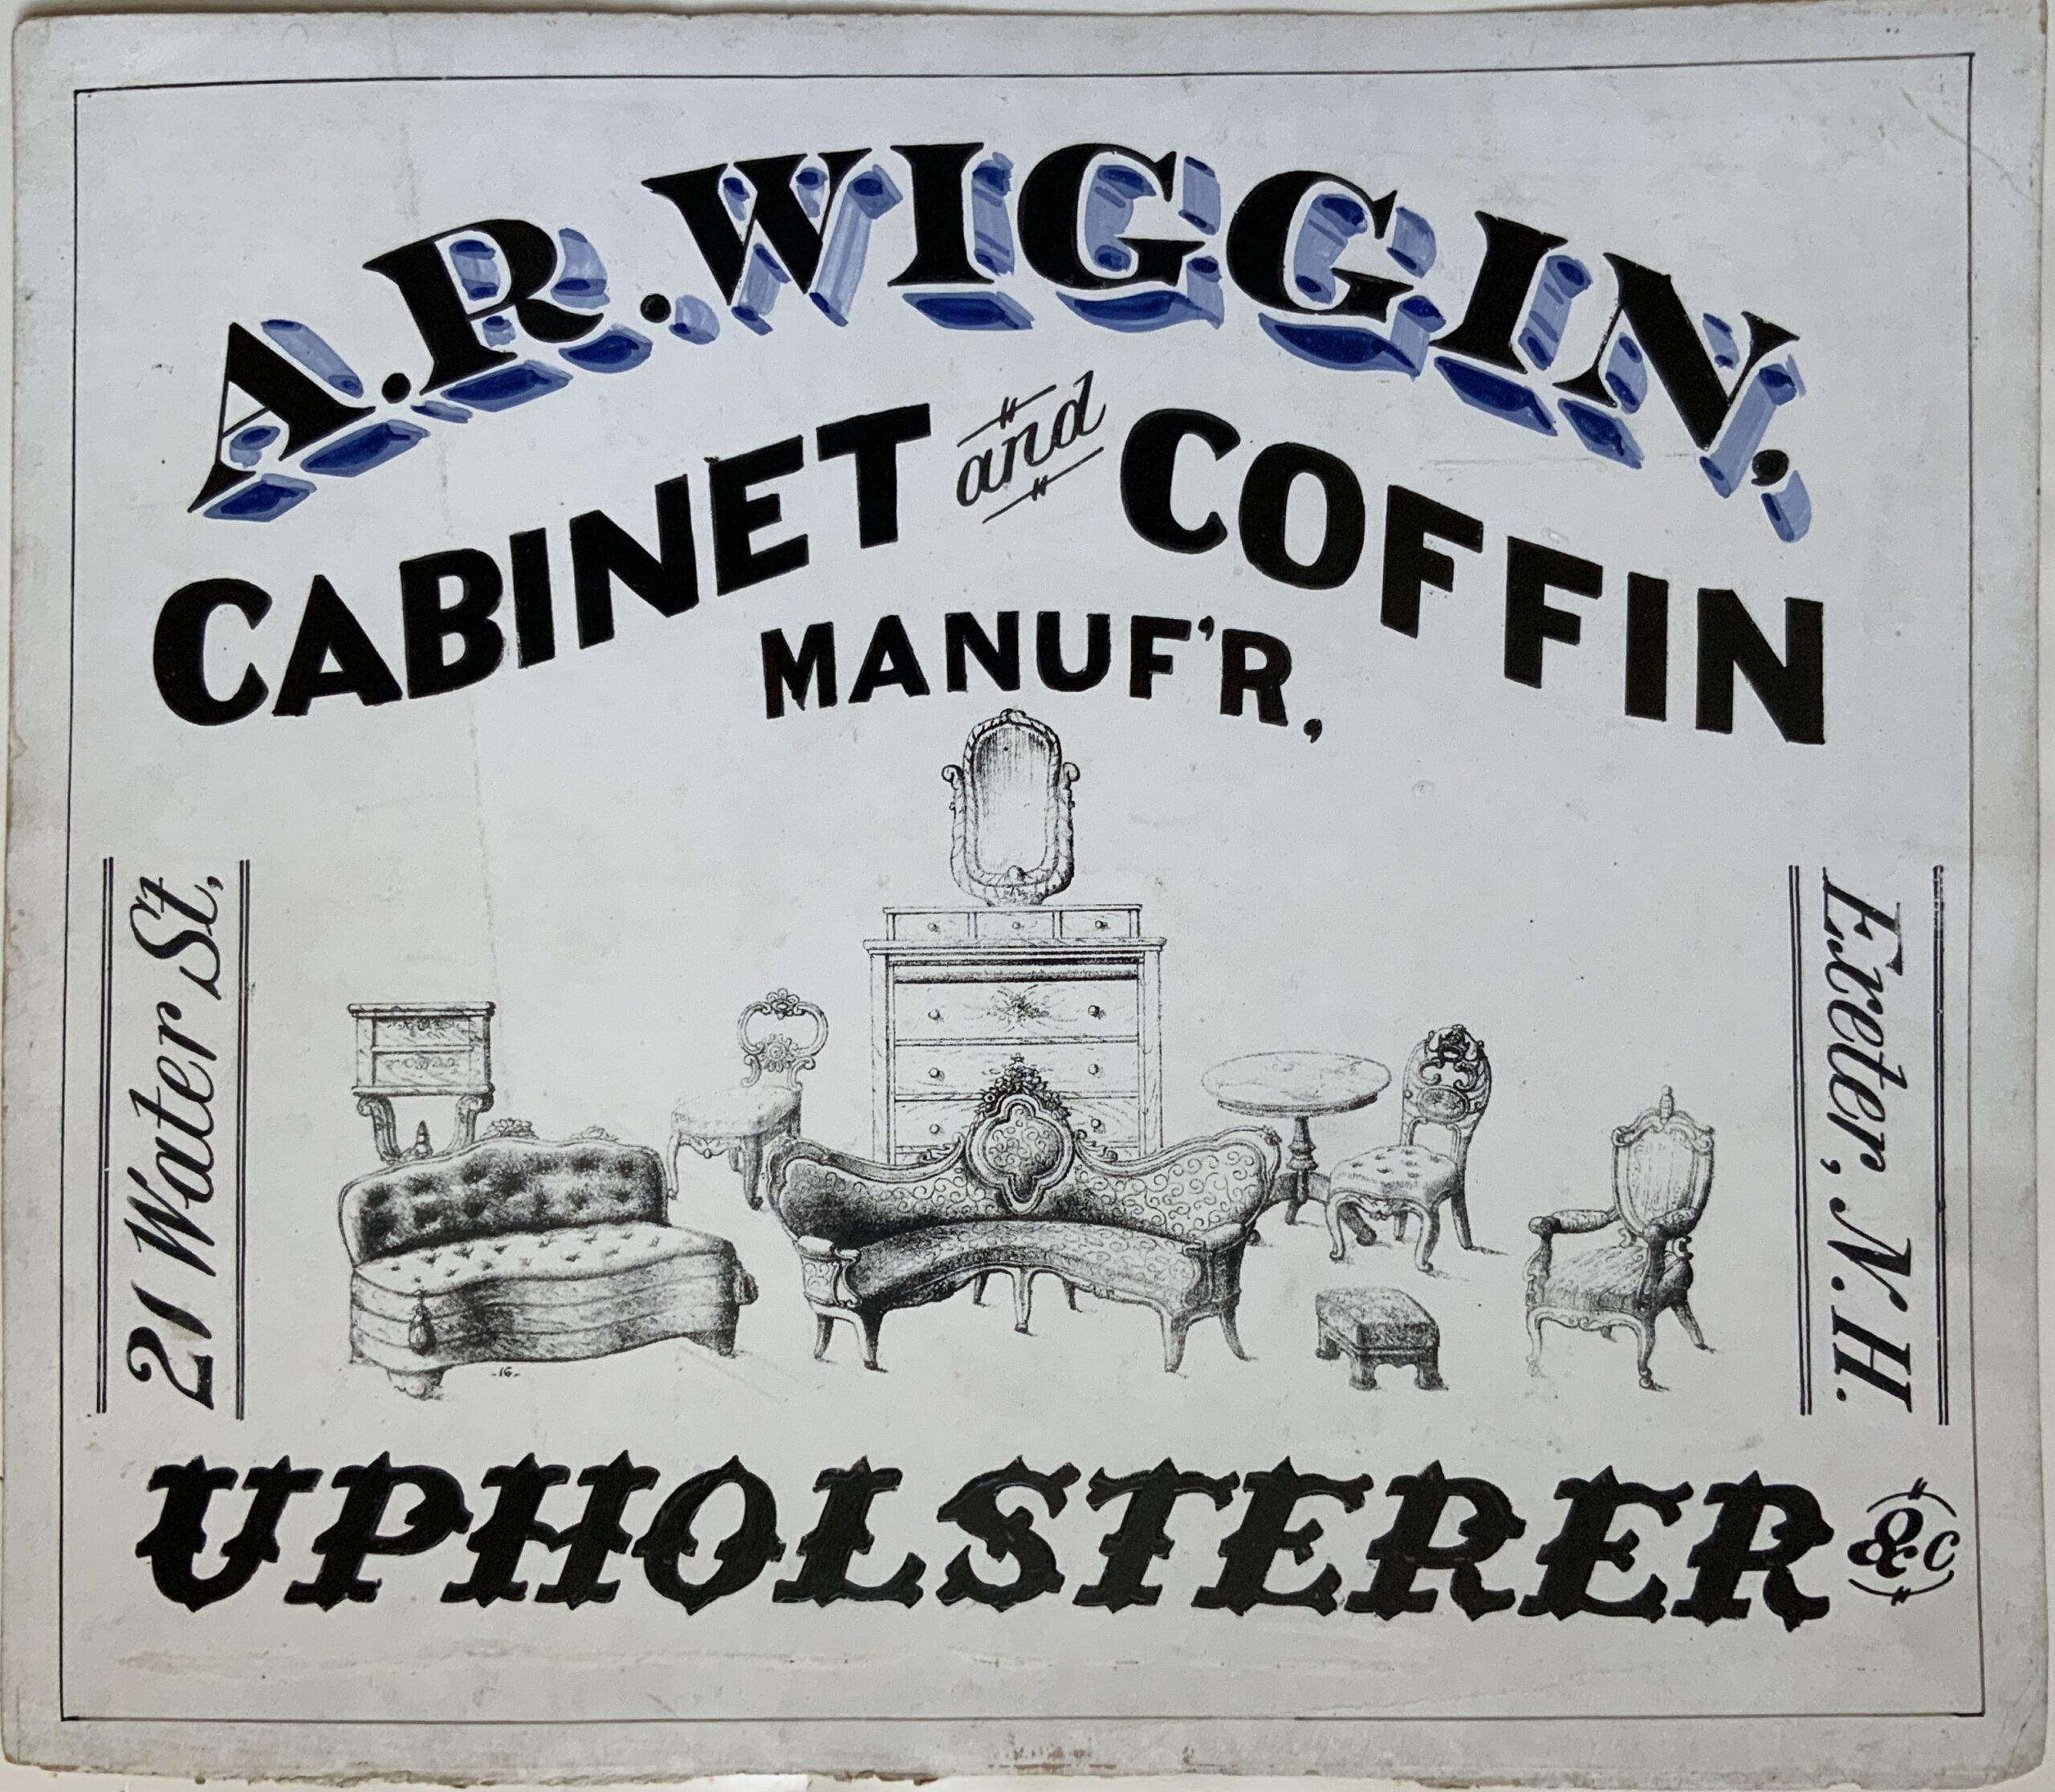 M112	ORIGINAL ART - “A.R. WIGGIN, CABINET AND COFFIN MANUF’R” - 21 WATER ST., EXETER, N.H.